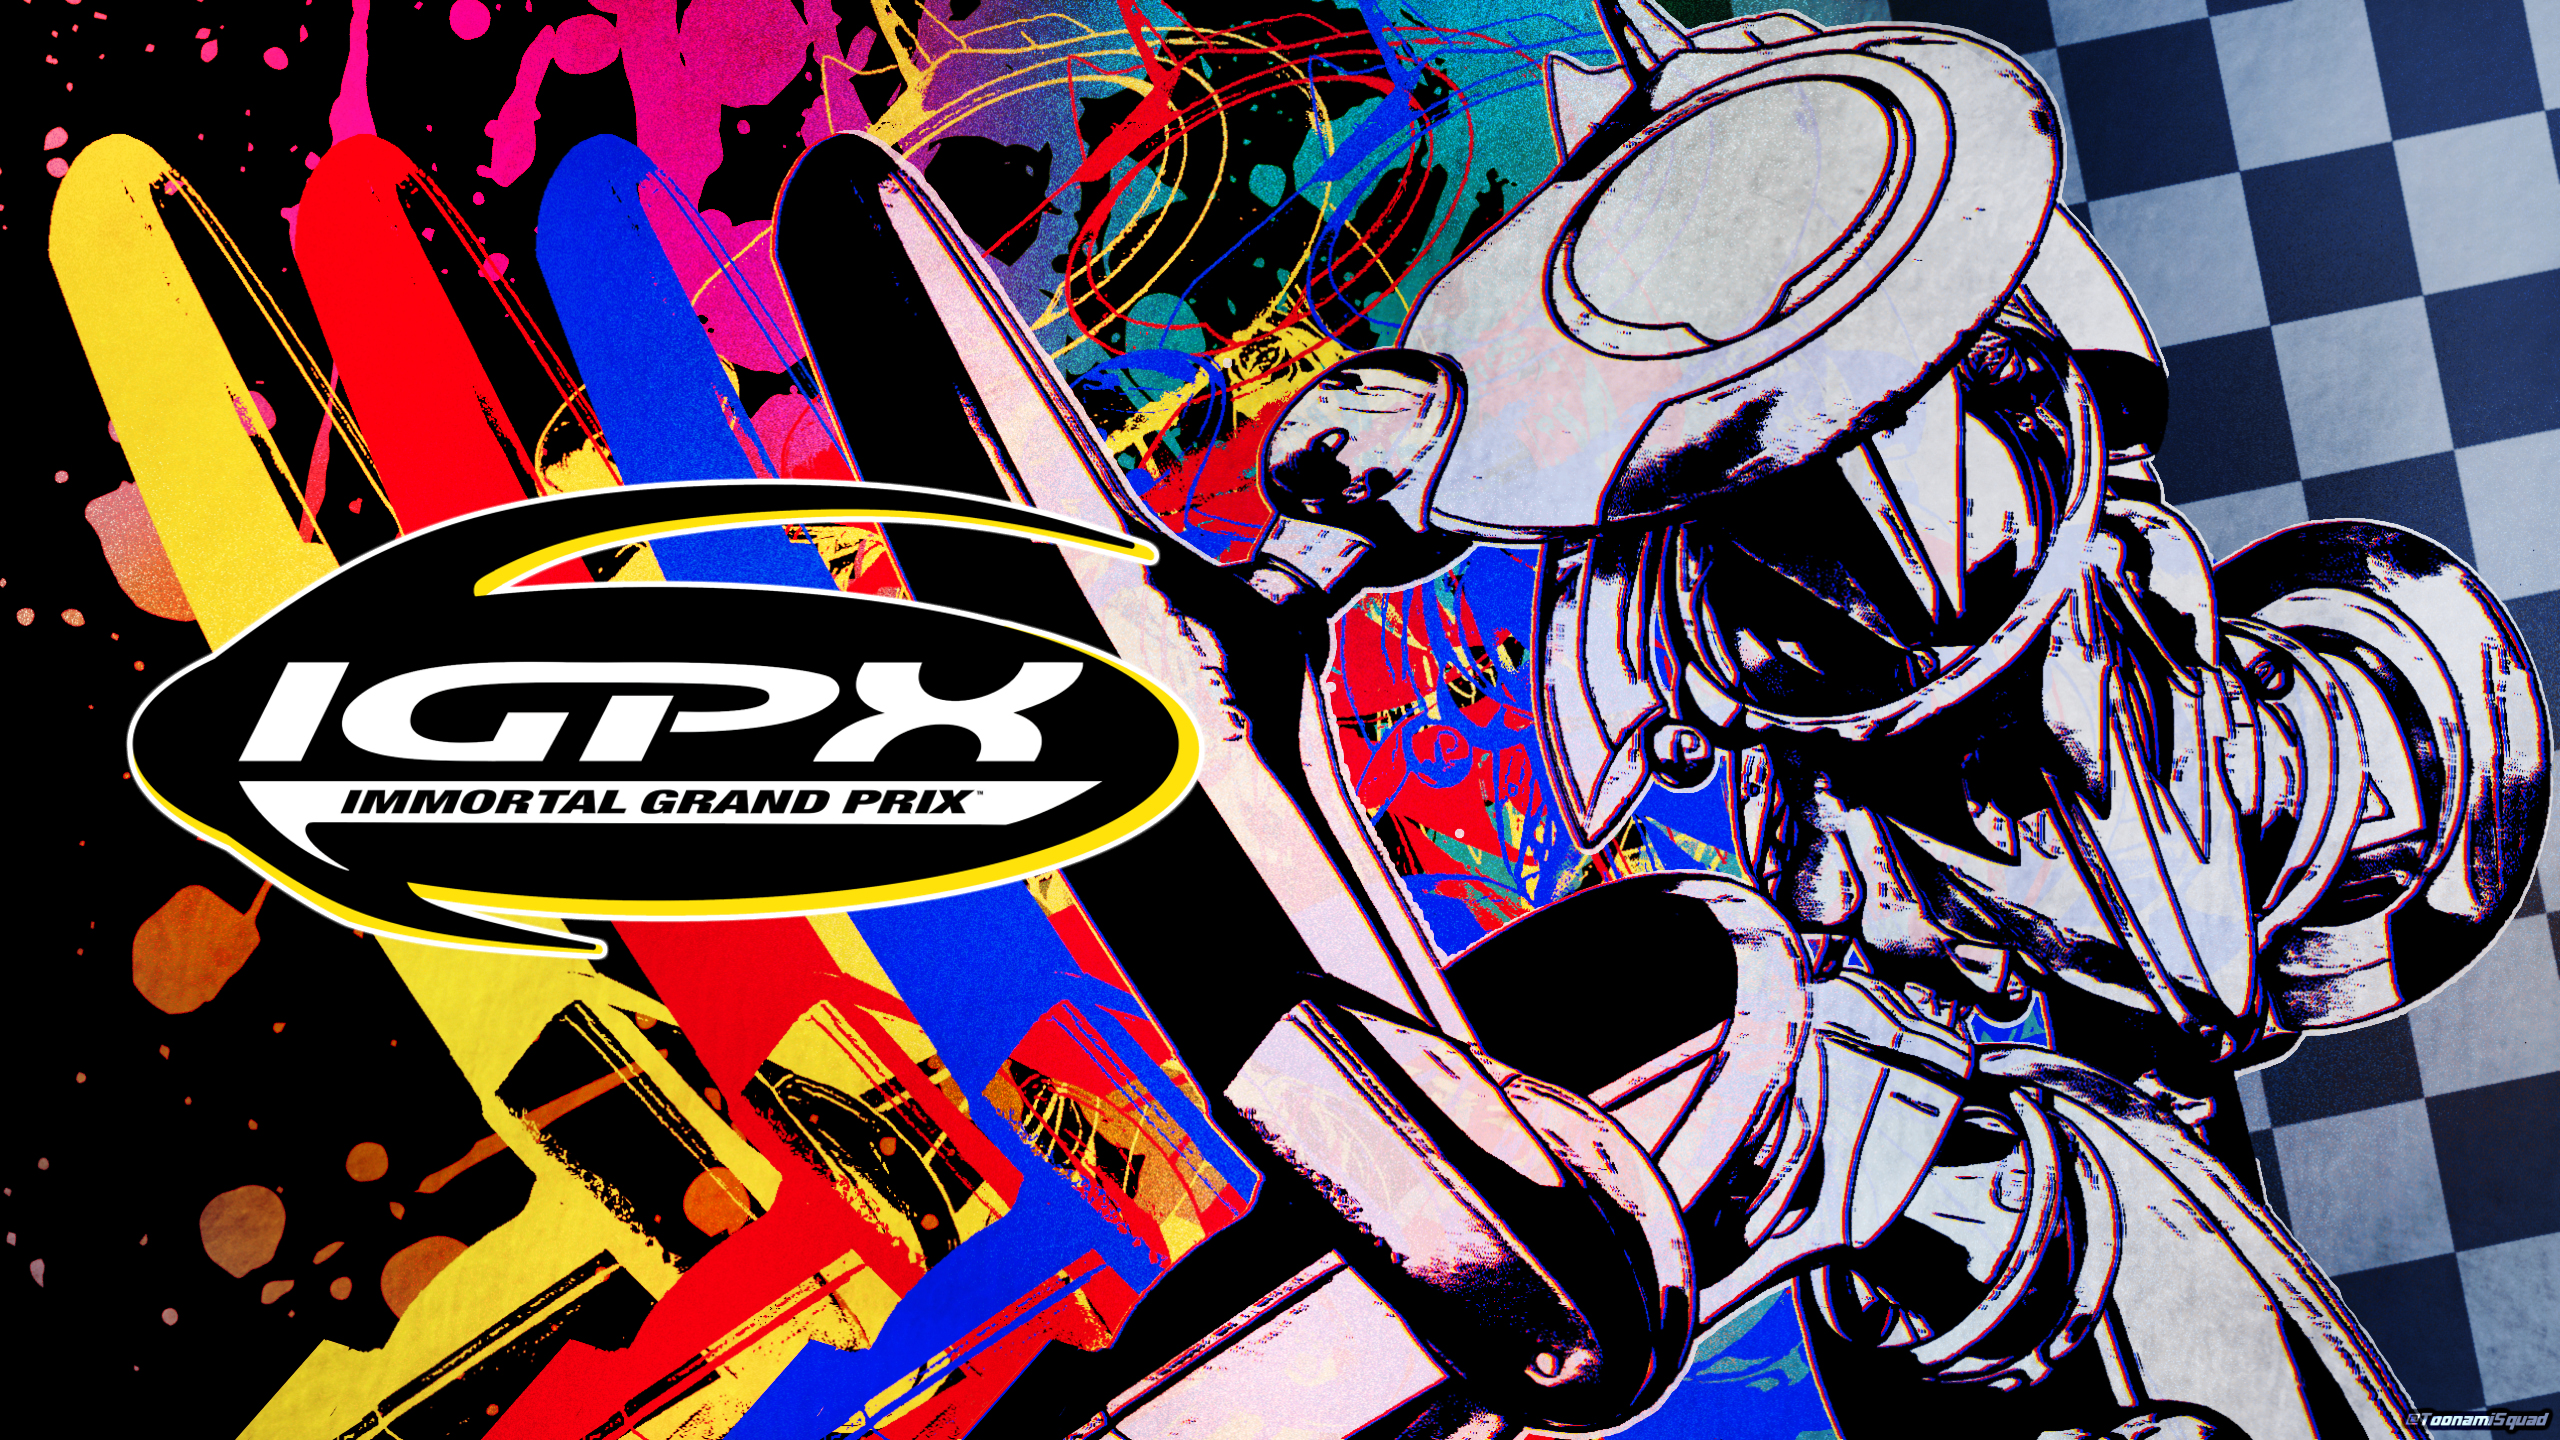 IGPX Remaster to air on Toonami this November 4, Demon Slayer and